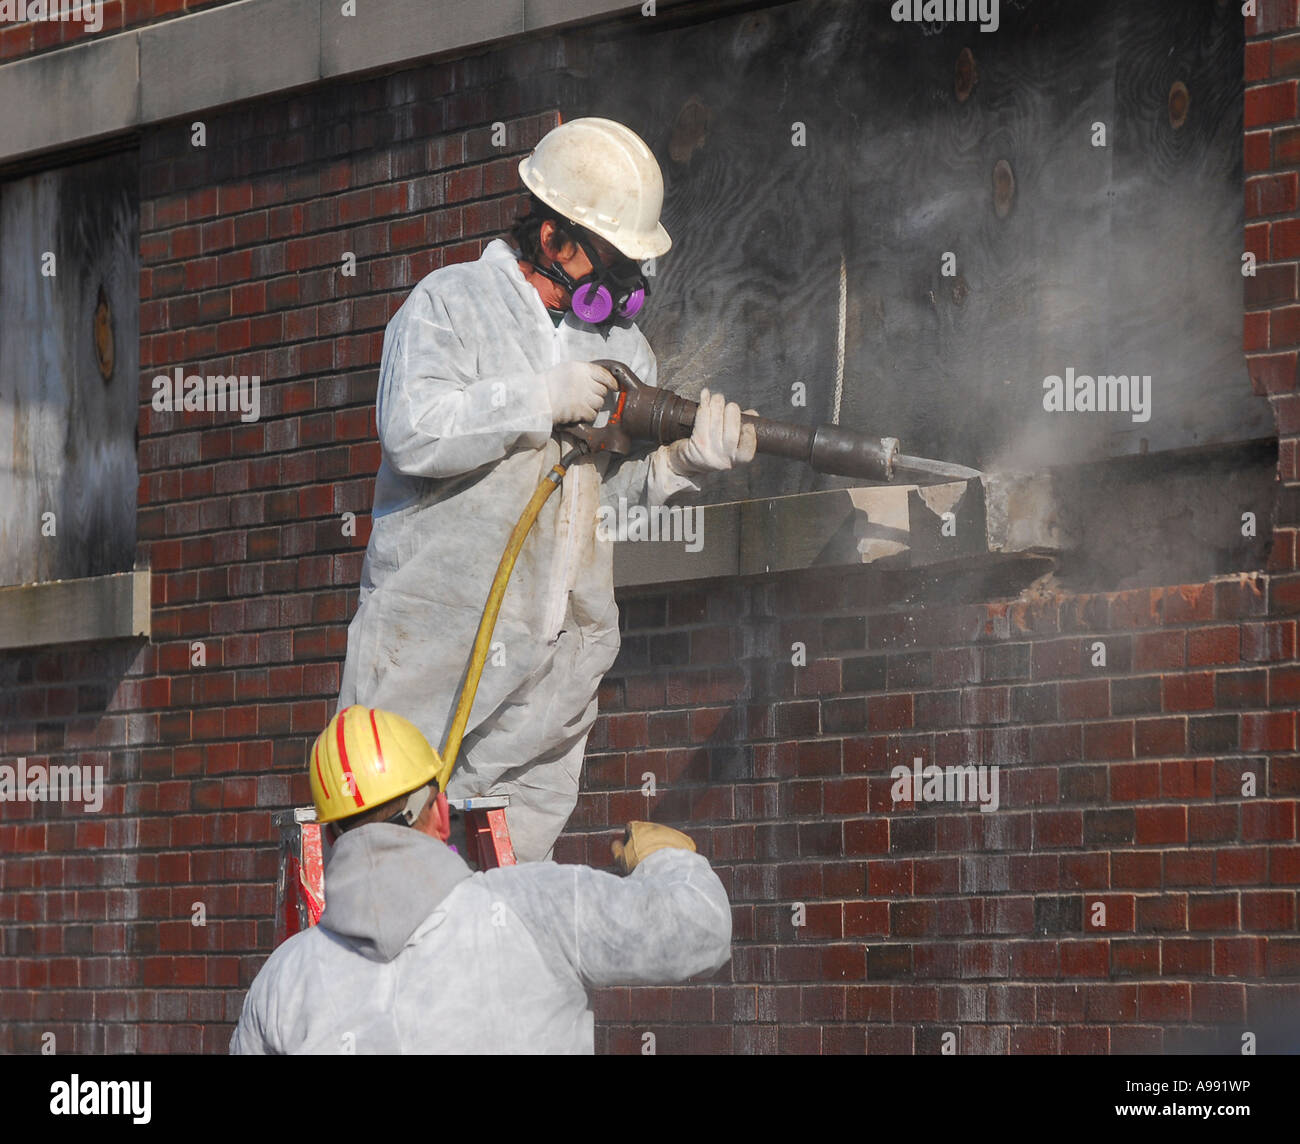 Workers use a pneumatic jackhammer to demolish a building Stock Photo